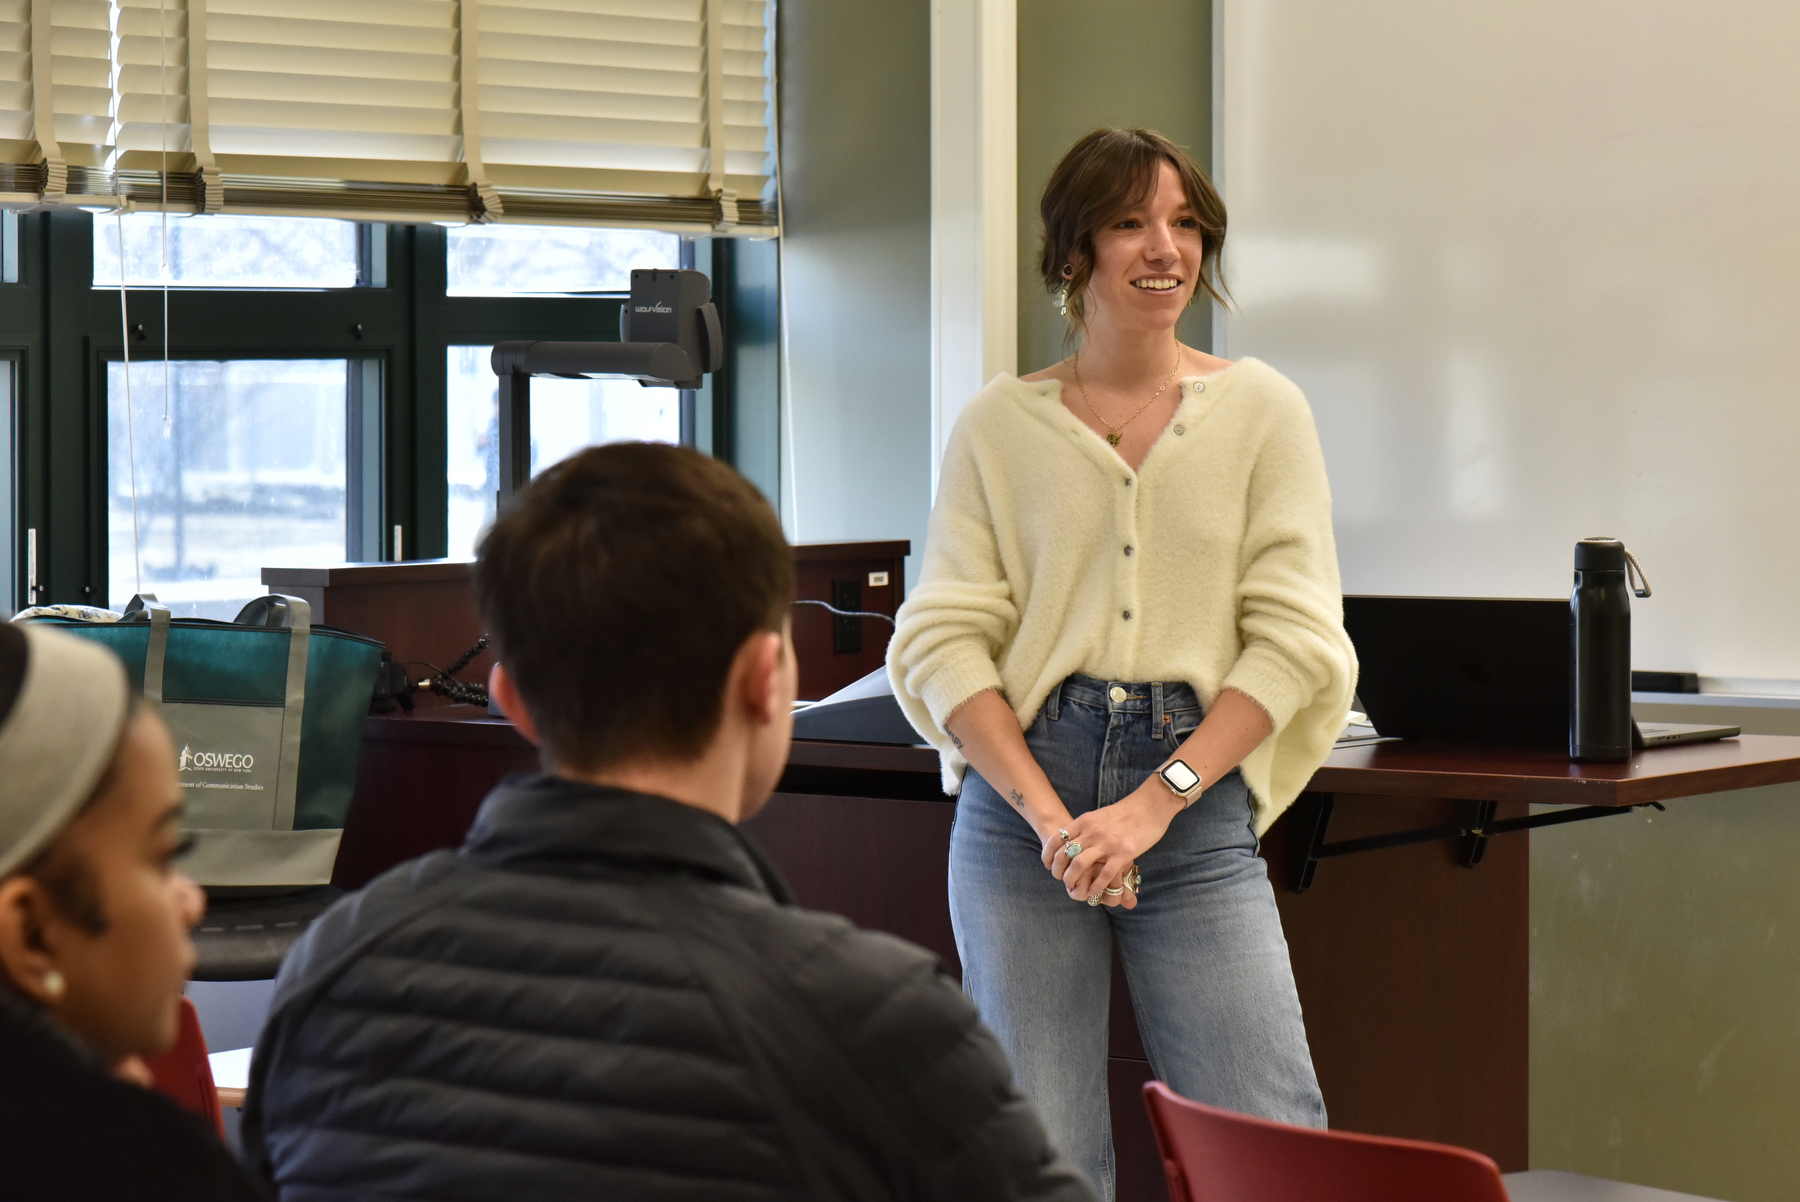 Carly Brundige, a 2014 alumna and technical consulting engineer at Cisco, visited campus Feb. 20 to speak with Andrea Vickery's COM 490 Class in Mahar Hall.